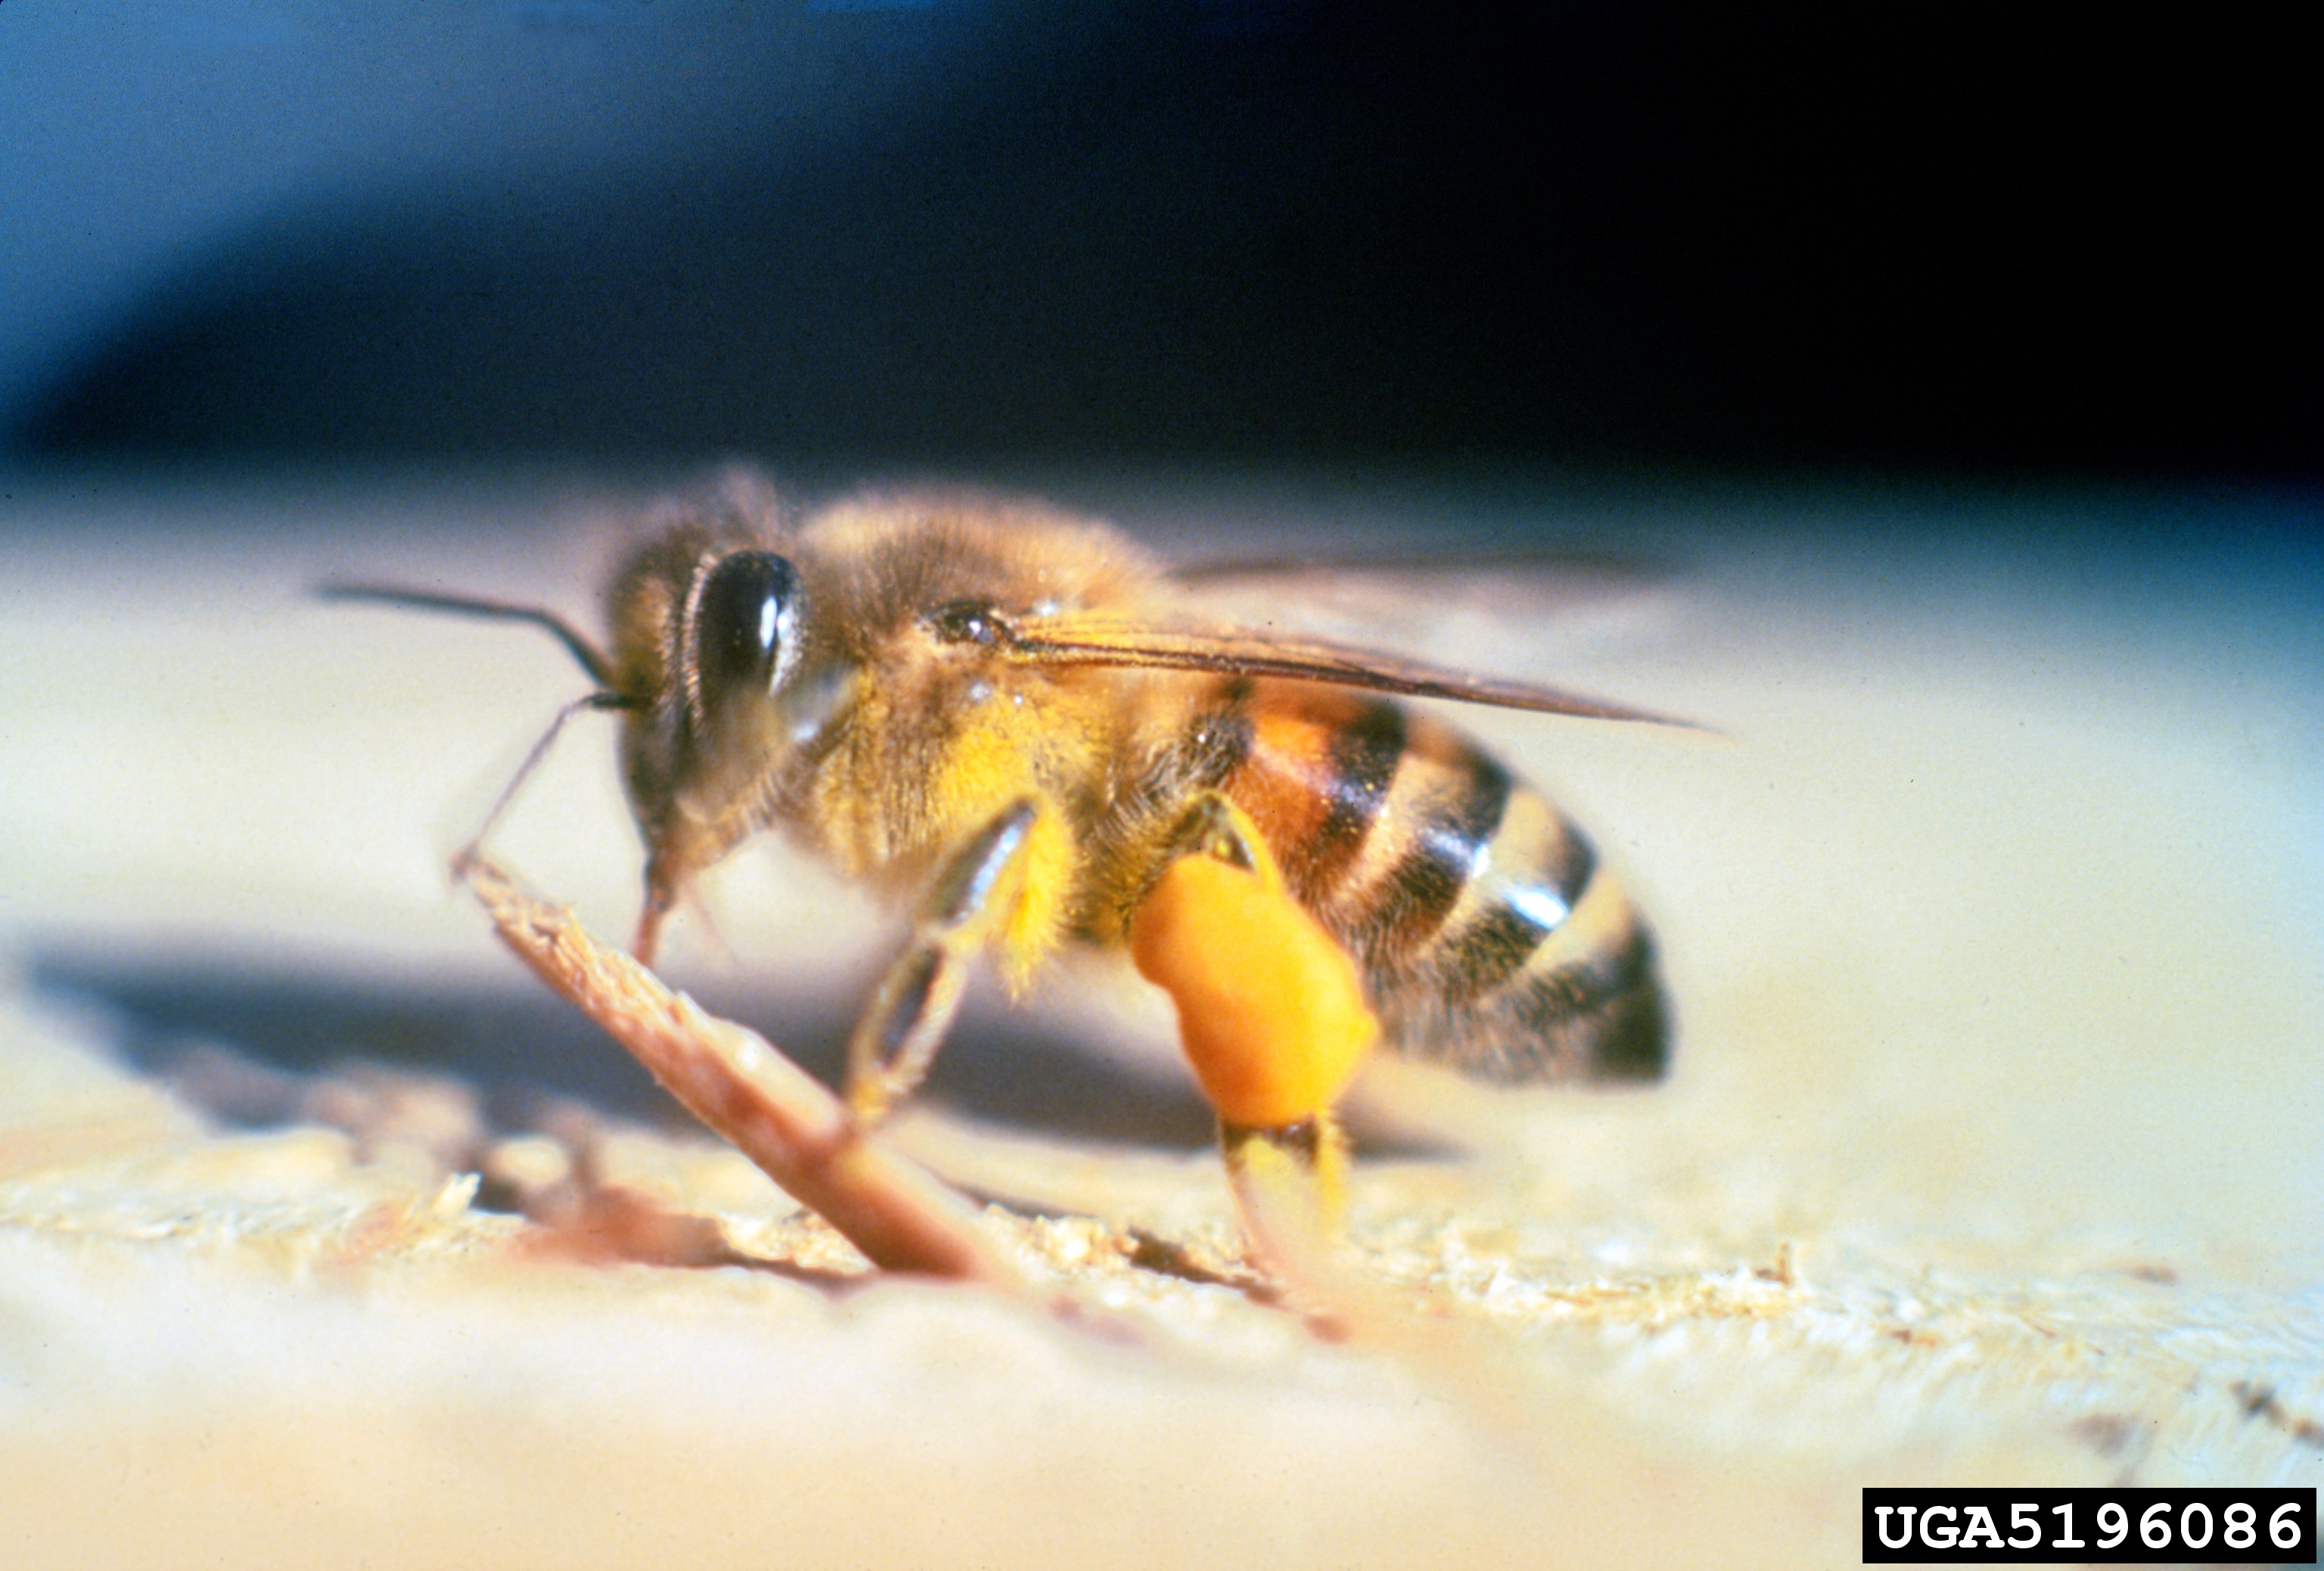 Africanised honey bees have a fuzzy thorax and black bands on abdomen 